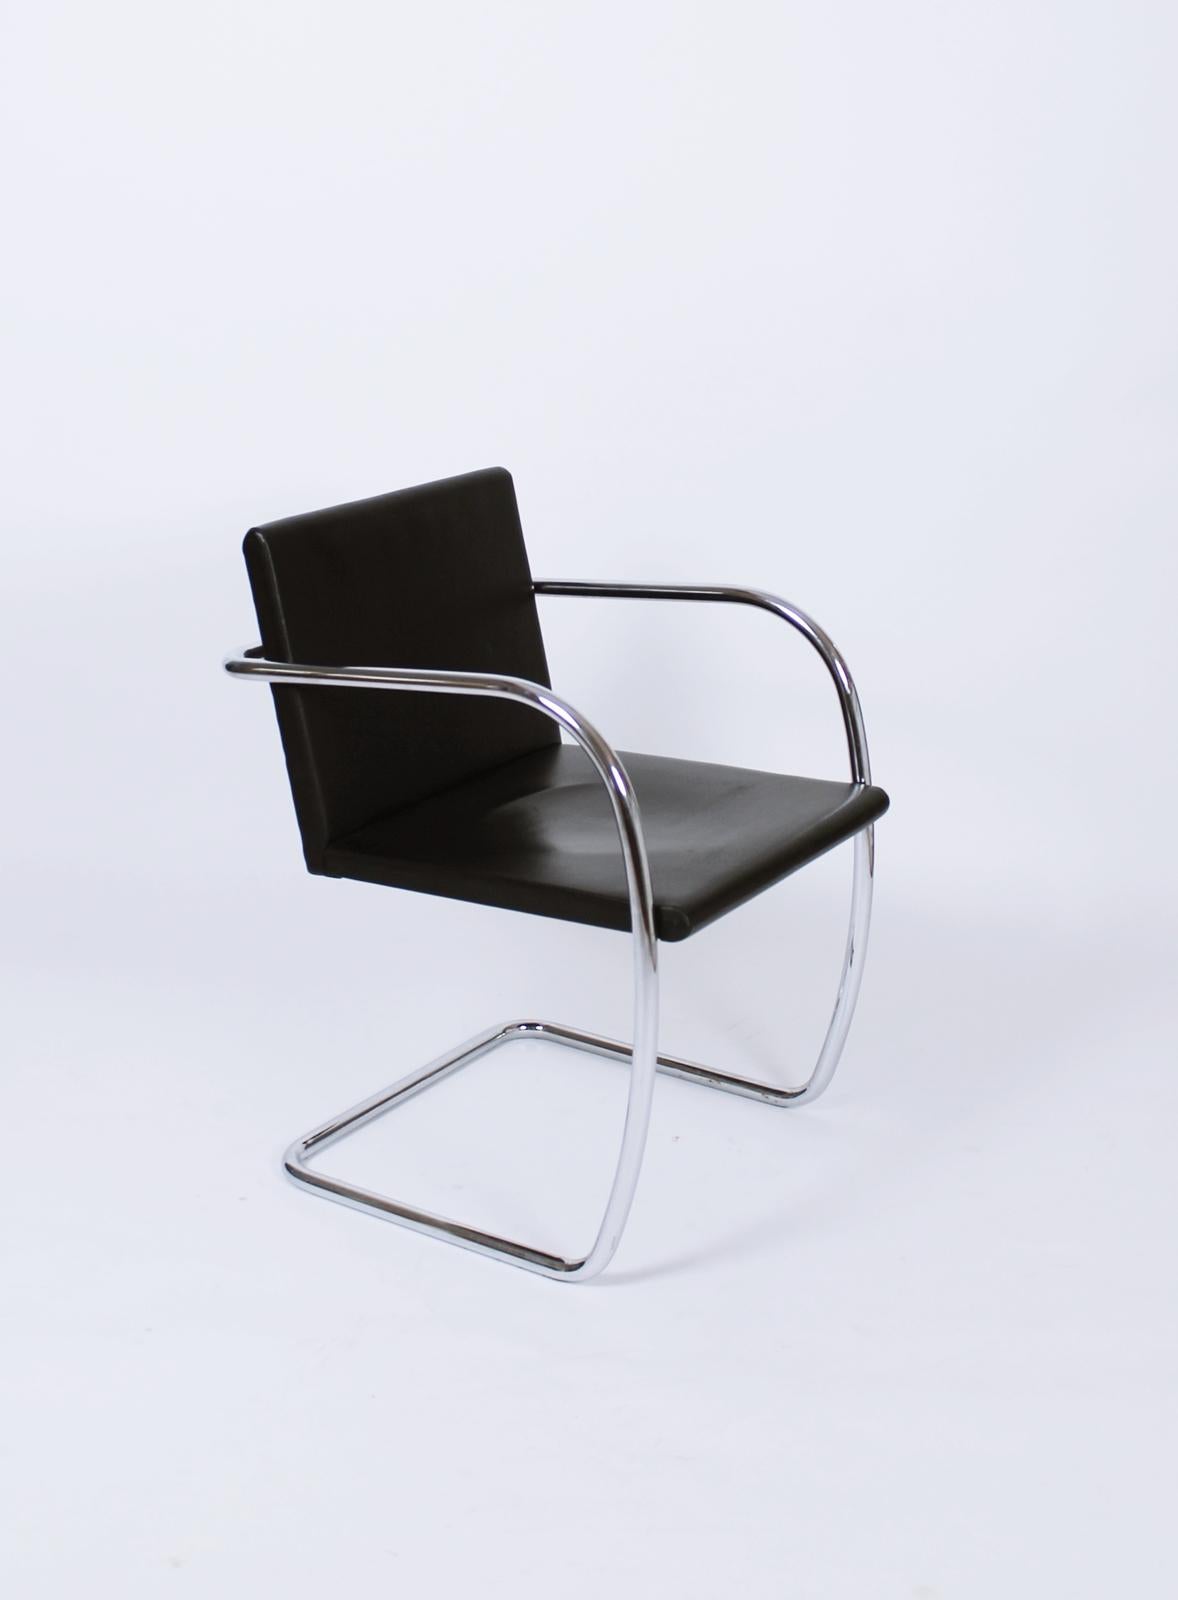 A Mid-Century Modern tubular Brno chair designed by Ludwig Mies van der Rohe. This is the rarer version with the thin pad seat and back. A steel frame upholstered in black leather. As shown in the first image, we have a four of these available.